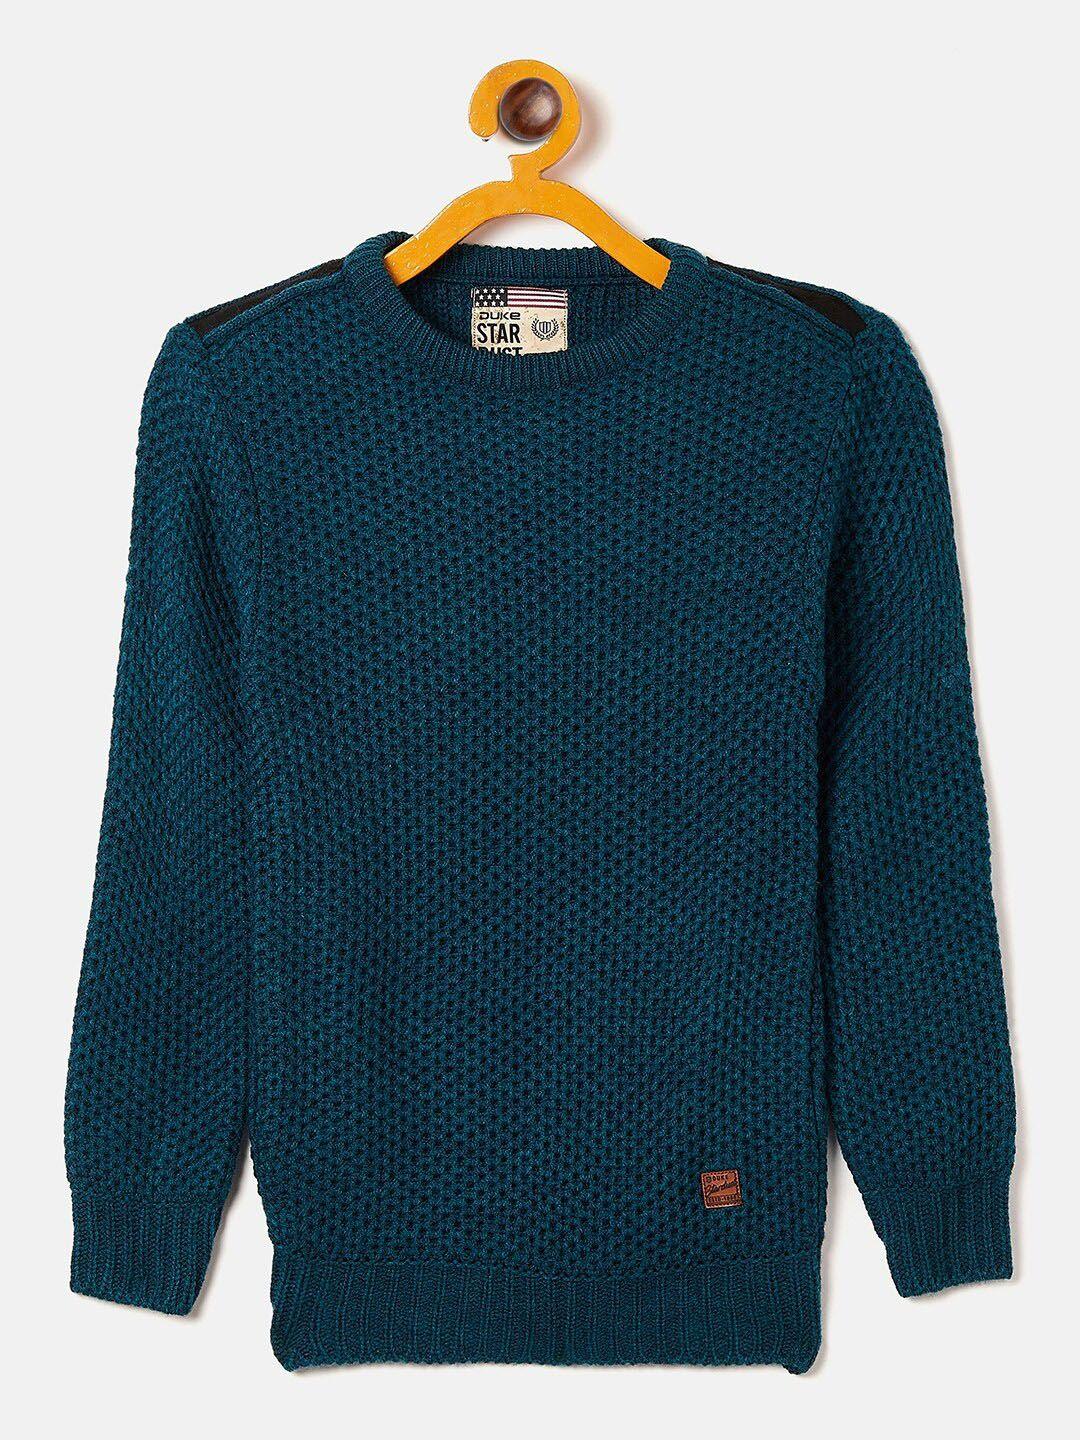 duke boys blue cable knit woolen pullover